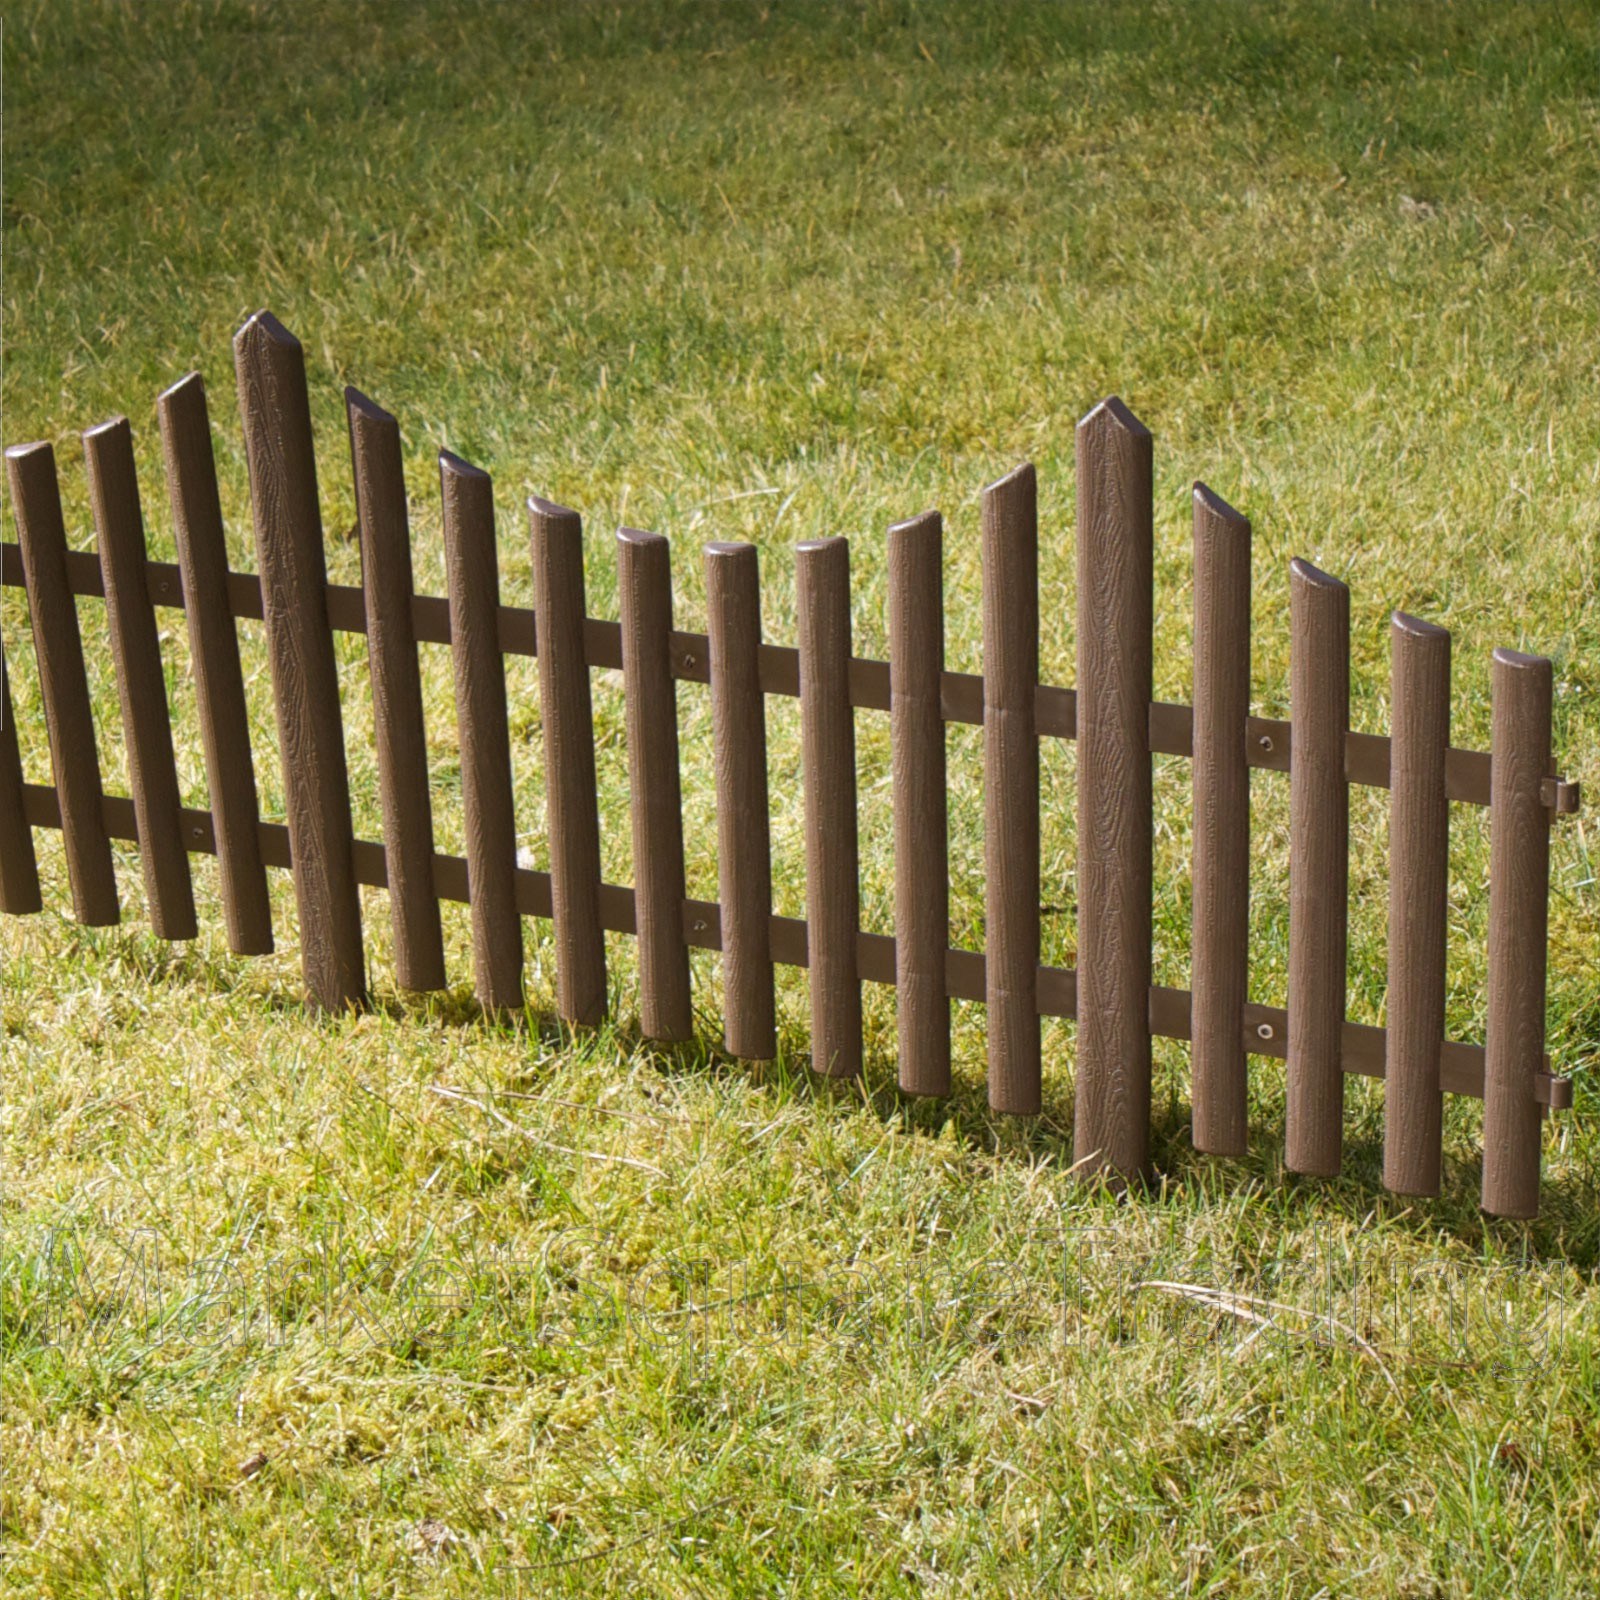 Low Picket Fencing Inspirational Plastic Fencing Lawn Grass Border ...